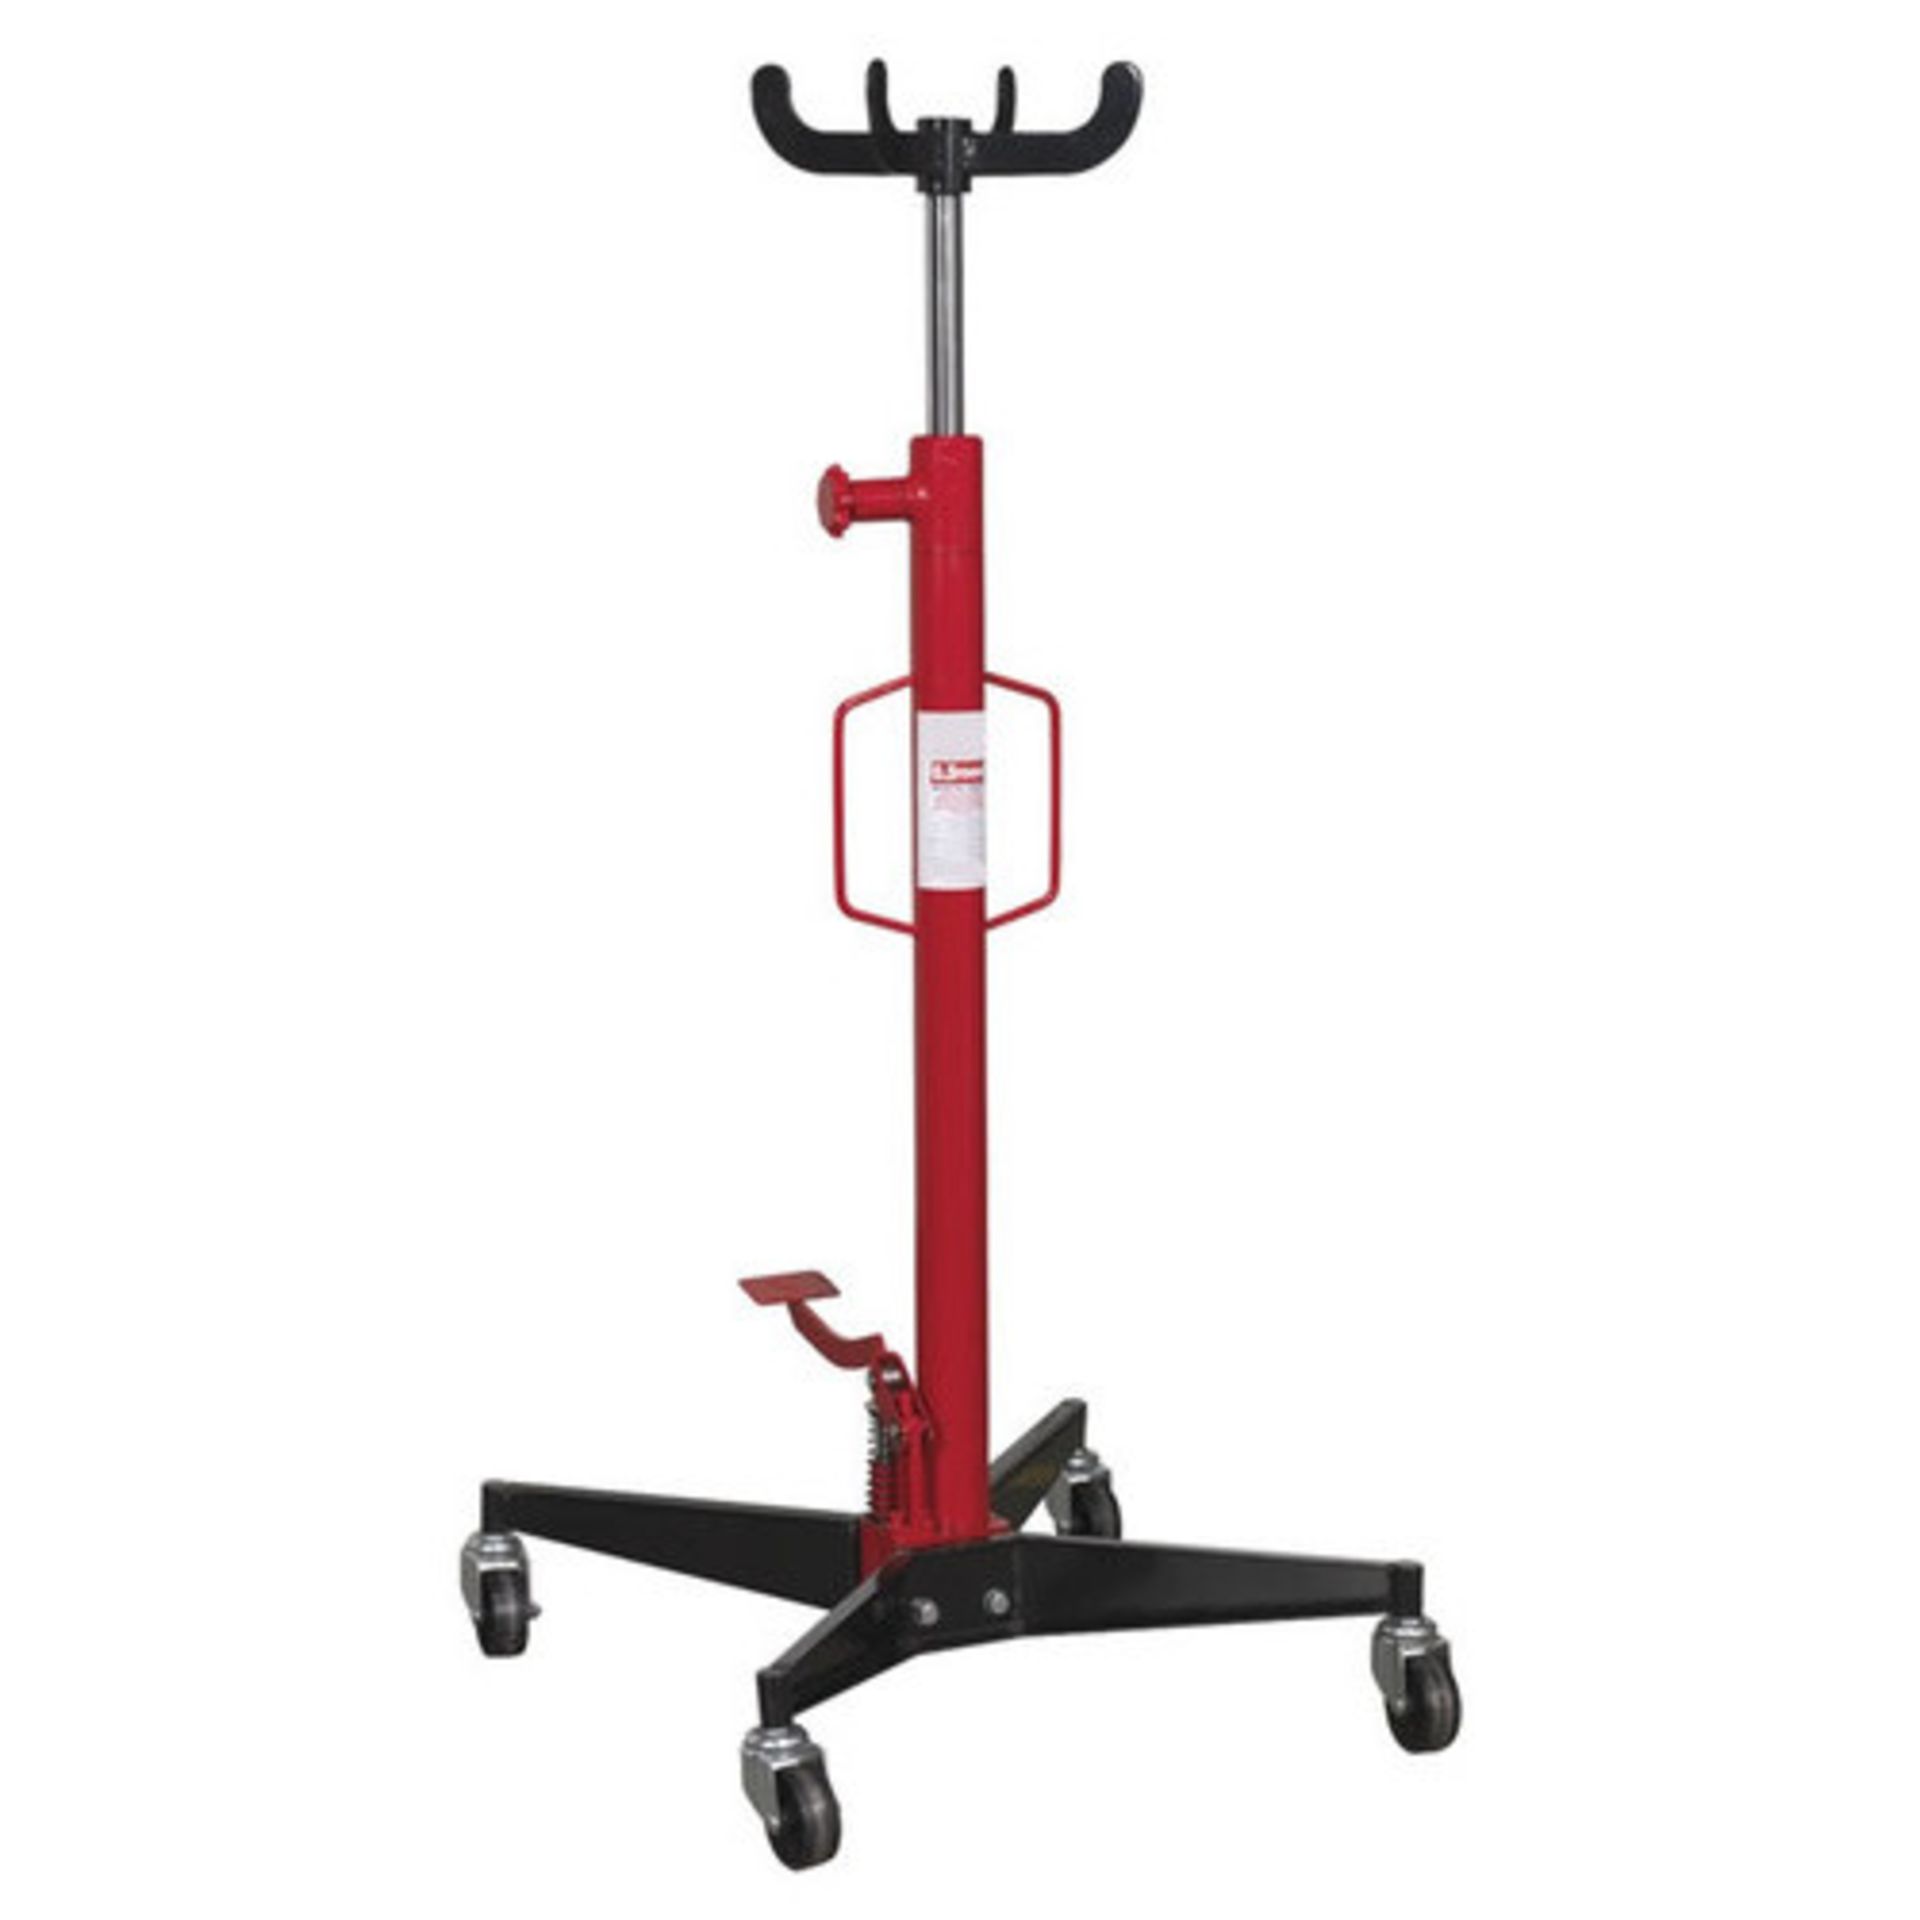 Transmission Jack 0.5 Ton 0.5 tonne Vertical
Min./Max. Saddle Height: 1120/1940mm.

Features high